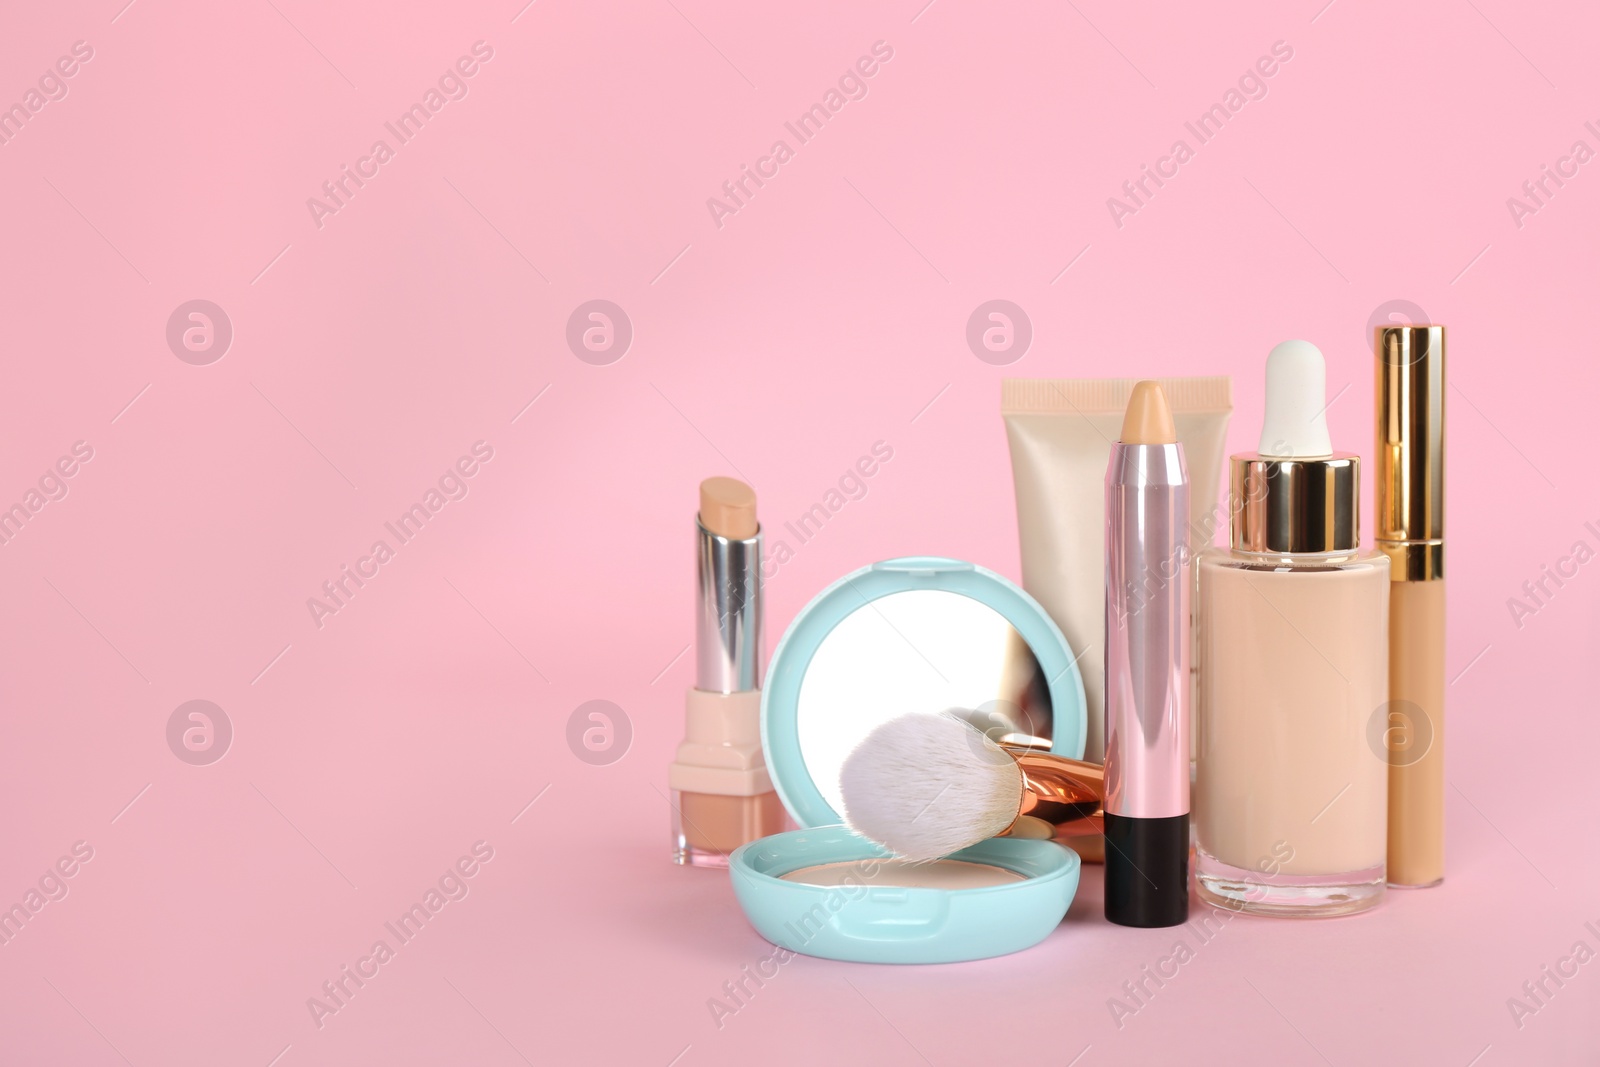 Photo of Foundation makeup products on pink background, space for text. Decorative cosmetics